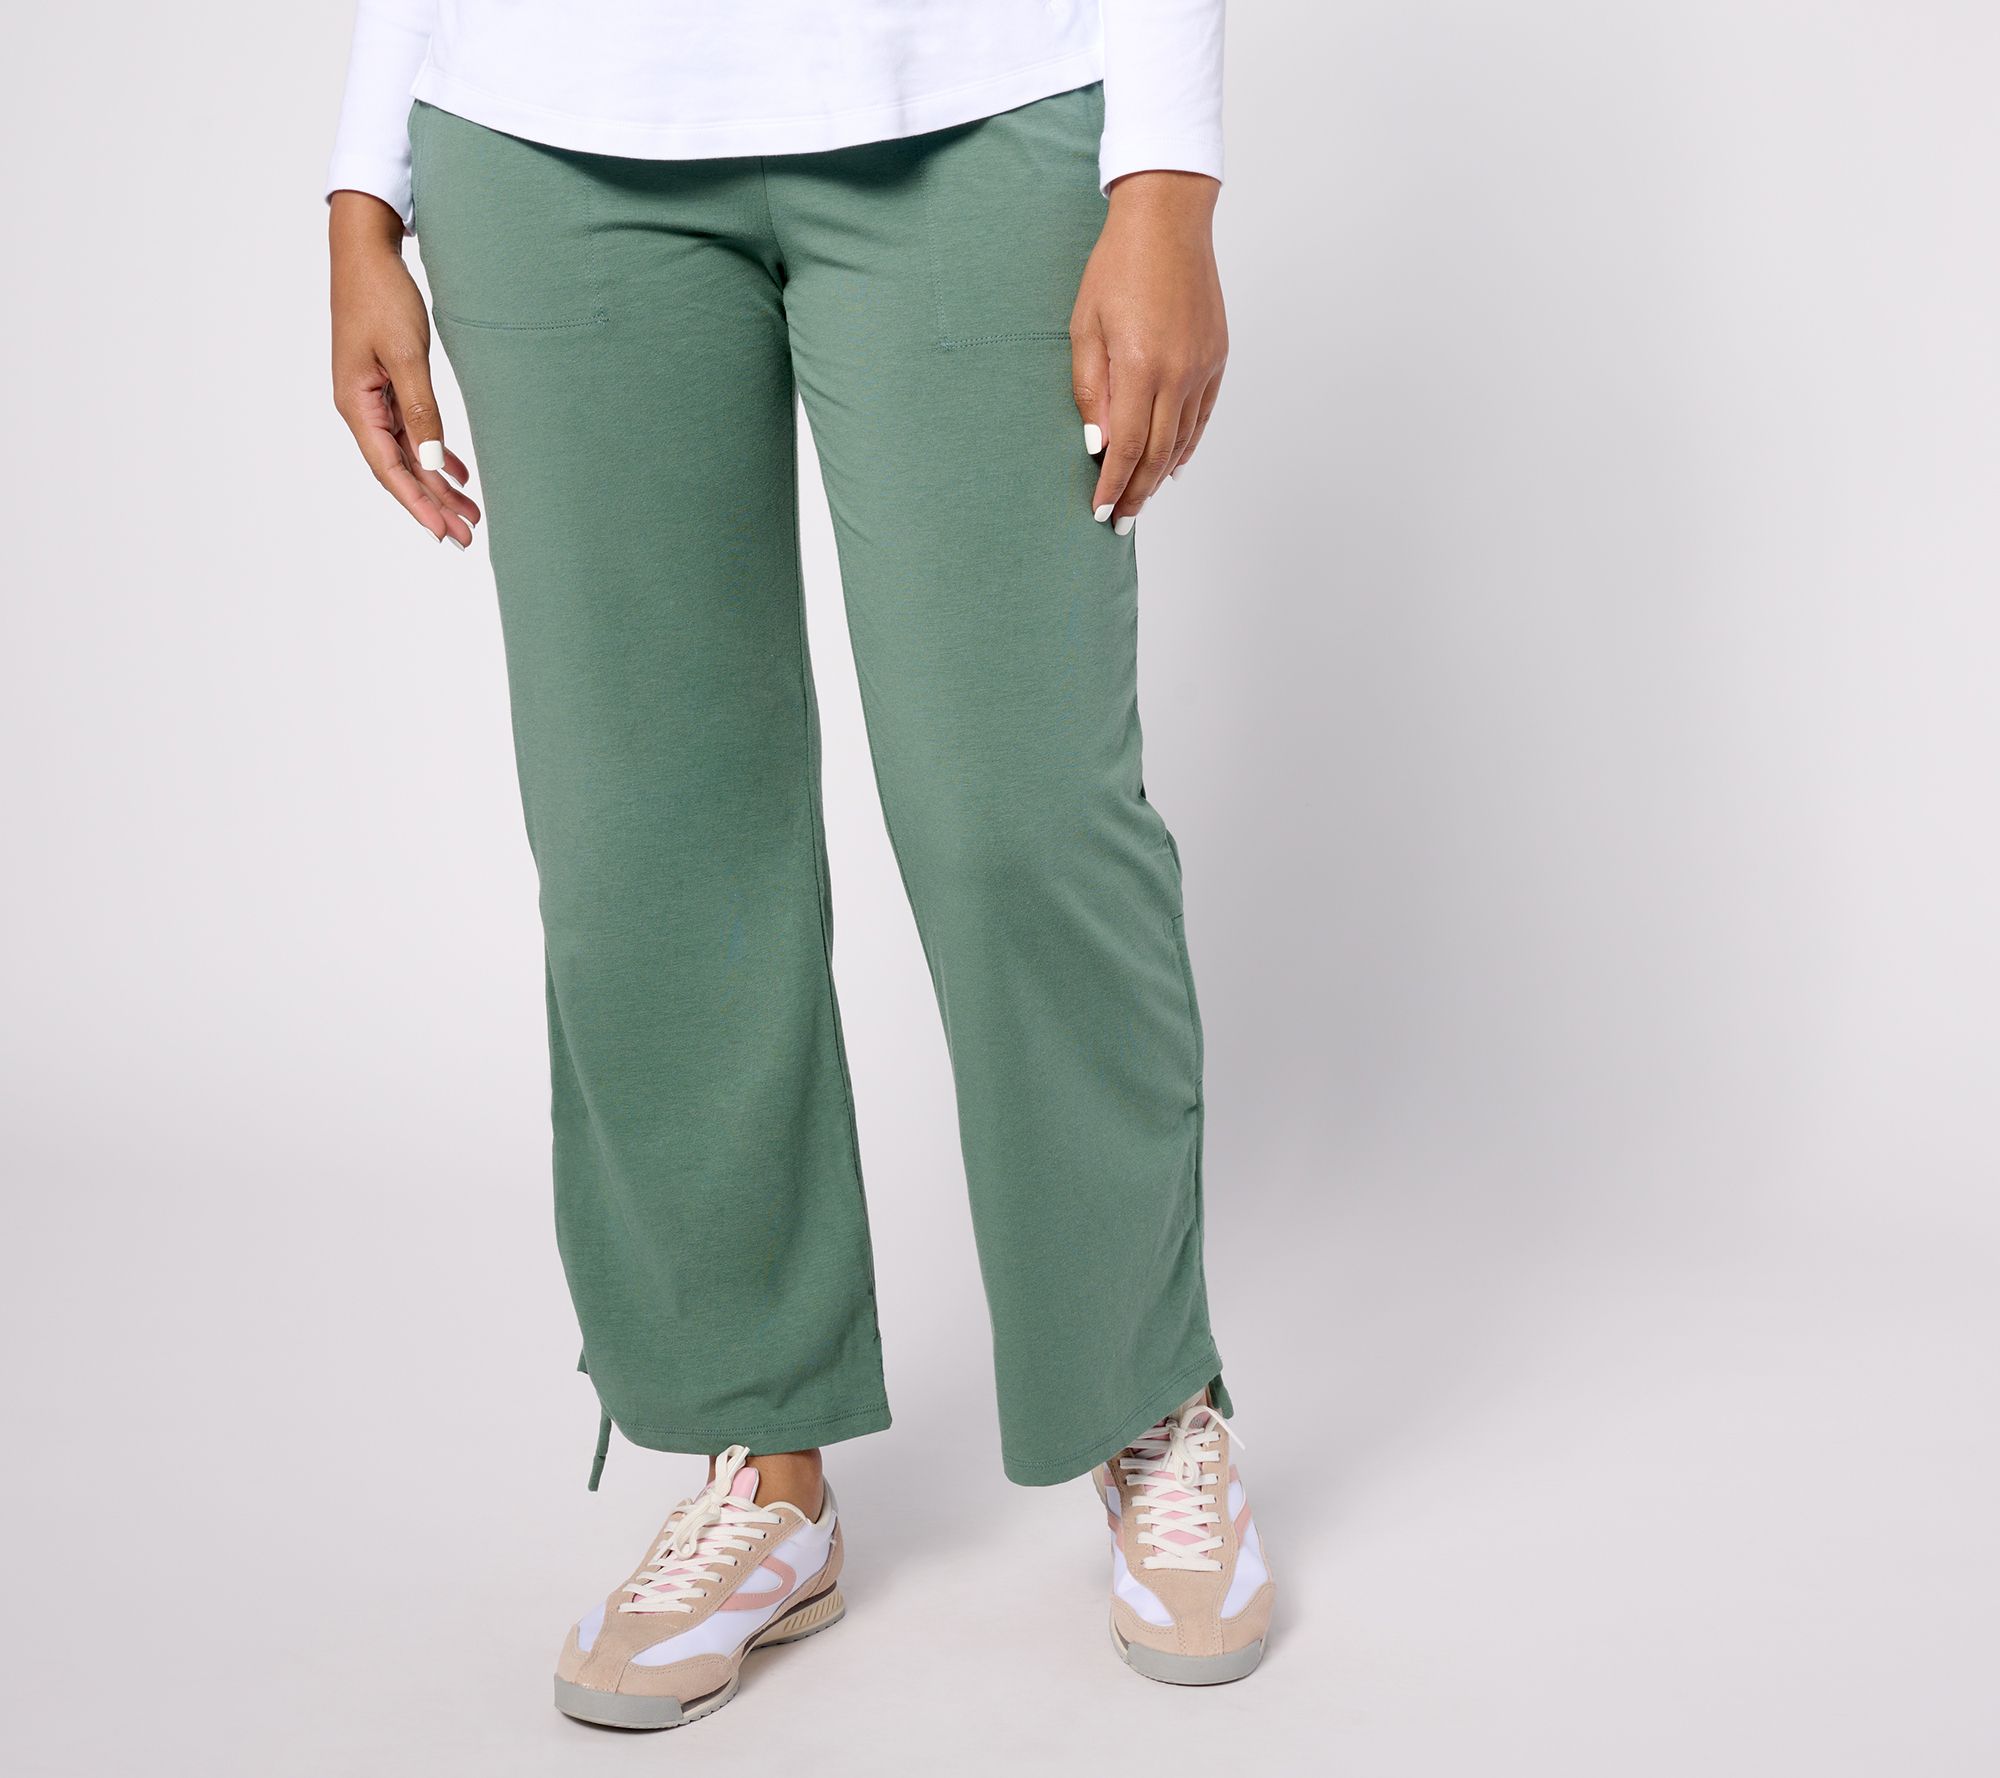 AnyBody Lounge Cozy Knit Ruched Pant 